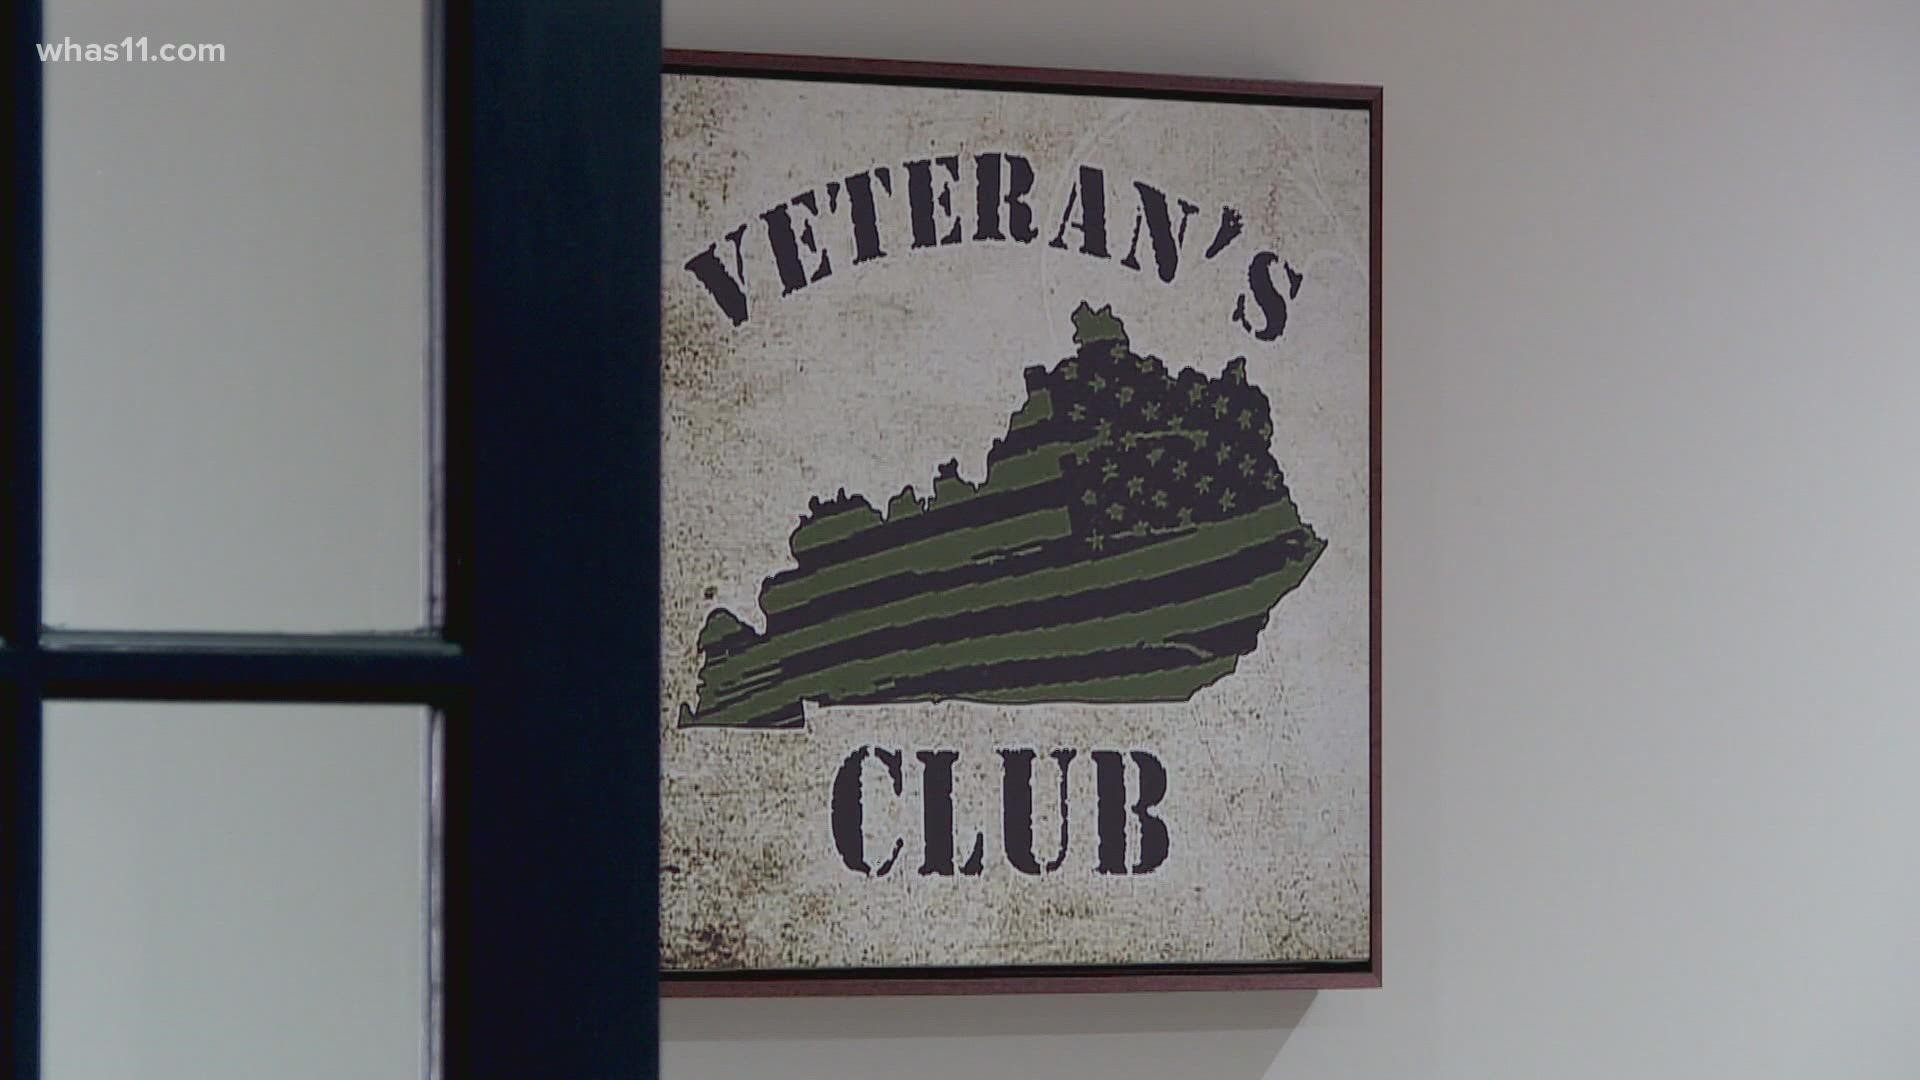 Jeremy Harrell realized there needed to be more resources for veterans, so he founded Veteran’s Club, Inc. in 2017.